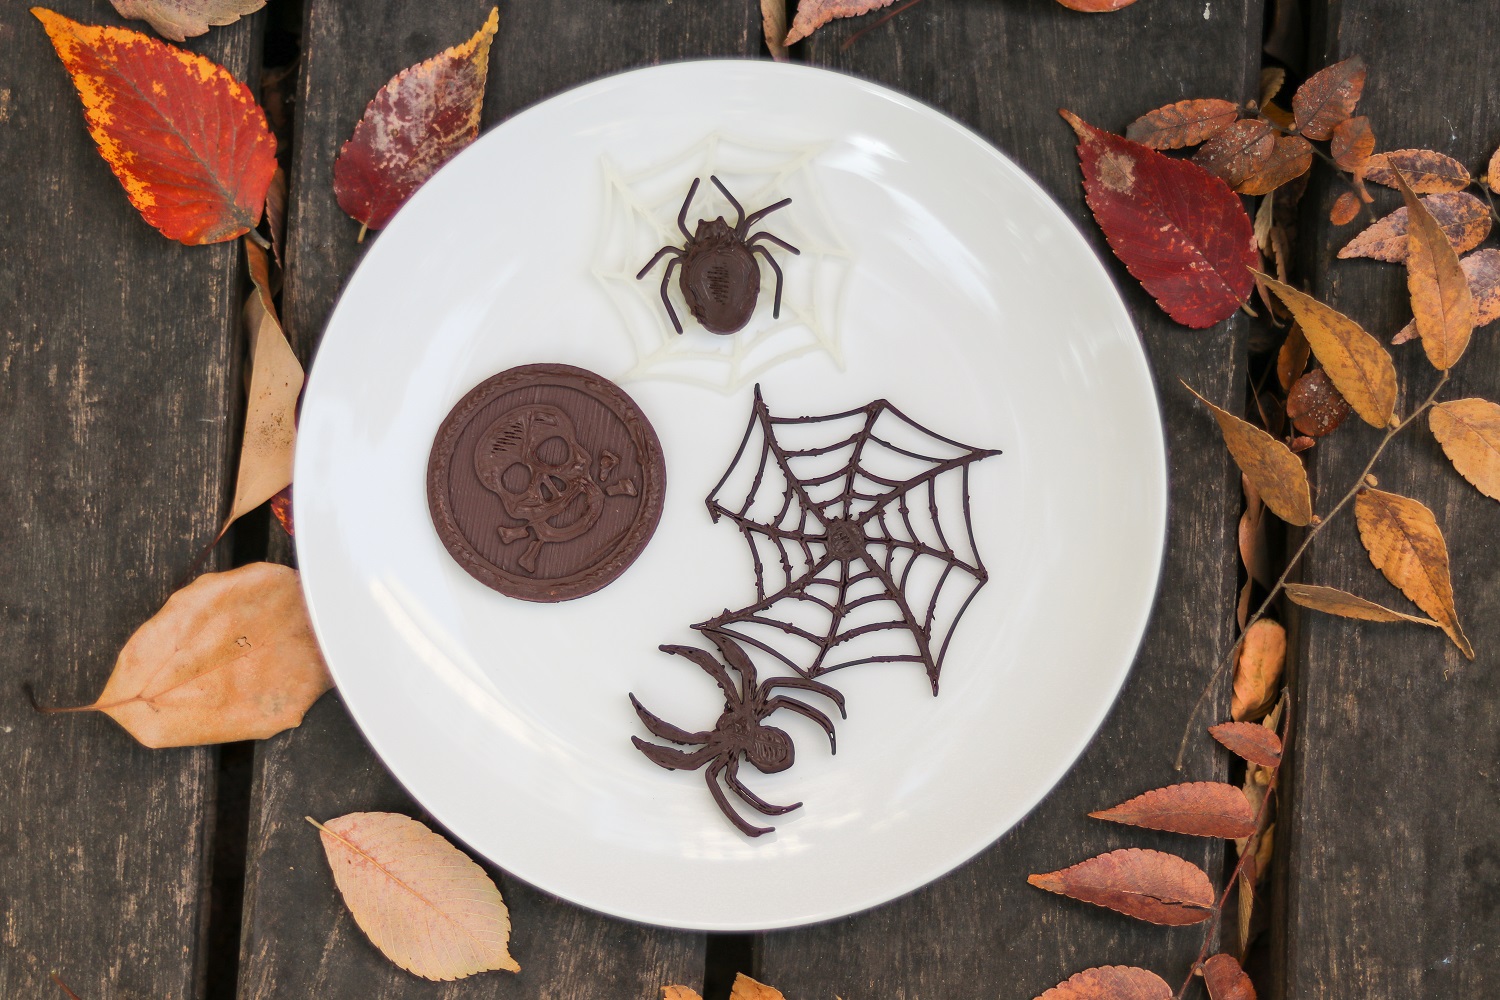 How are you going to celebrate the Halloween? Print different chocolate shapes to make this Halloween special and funny.